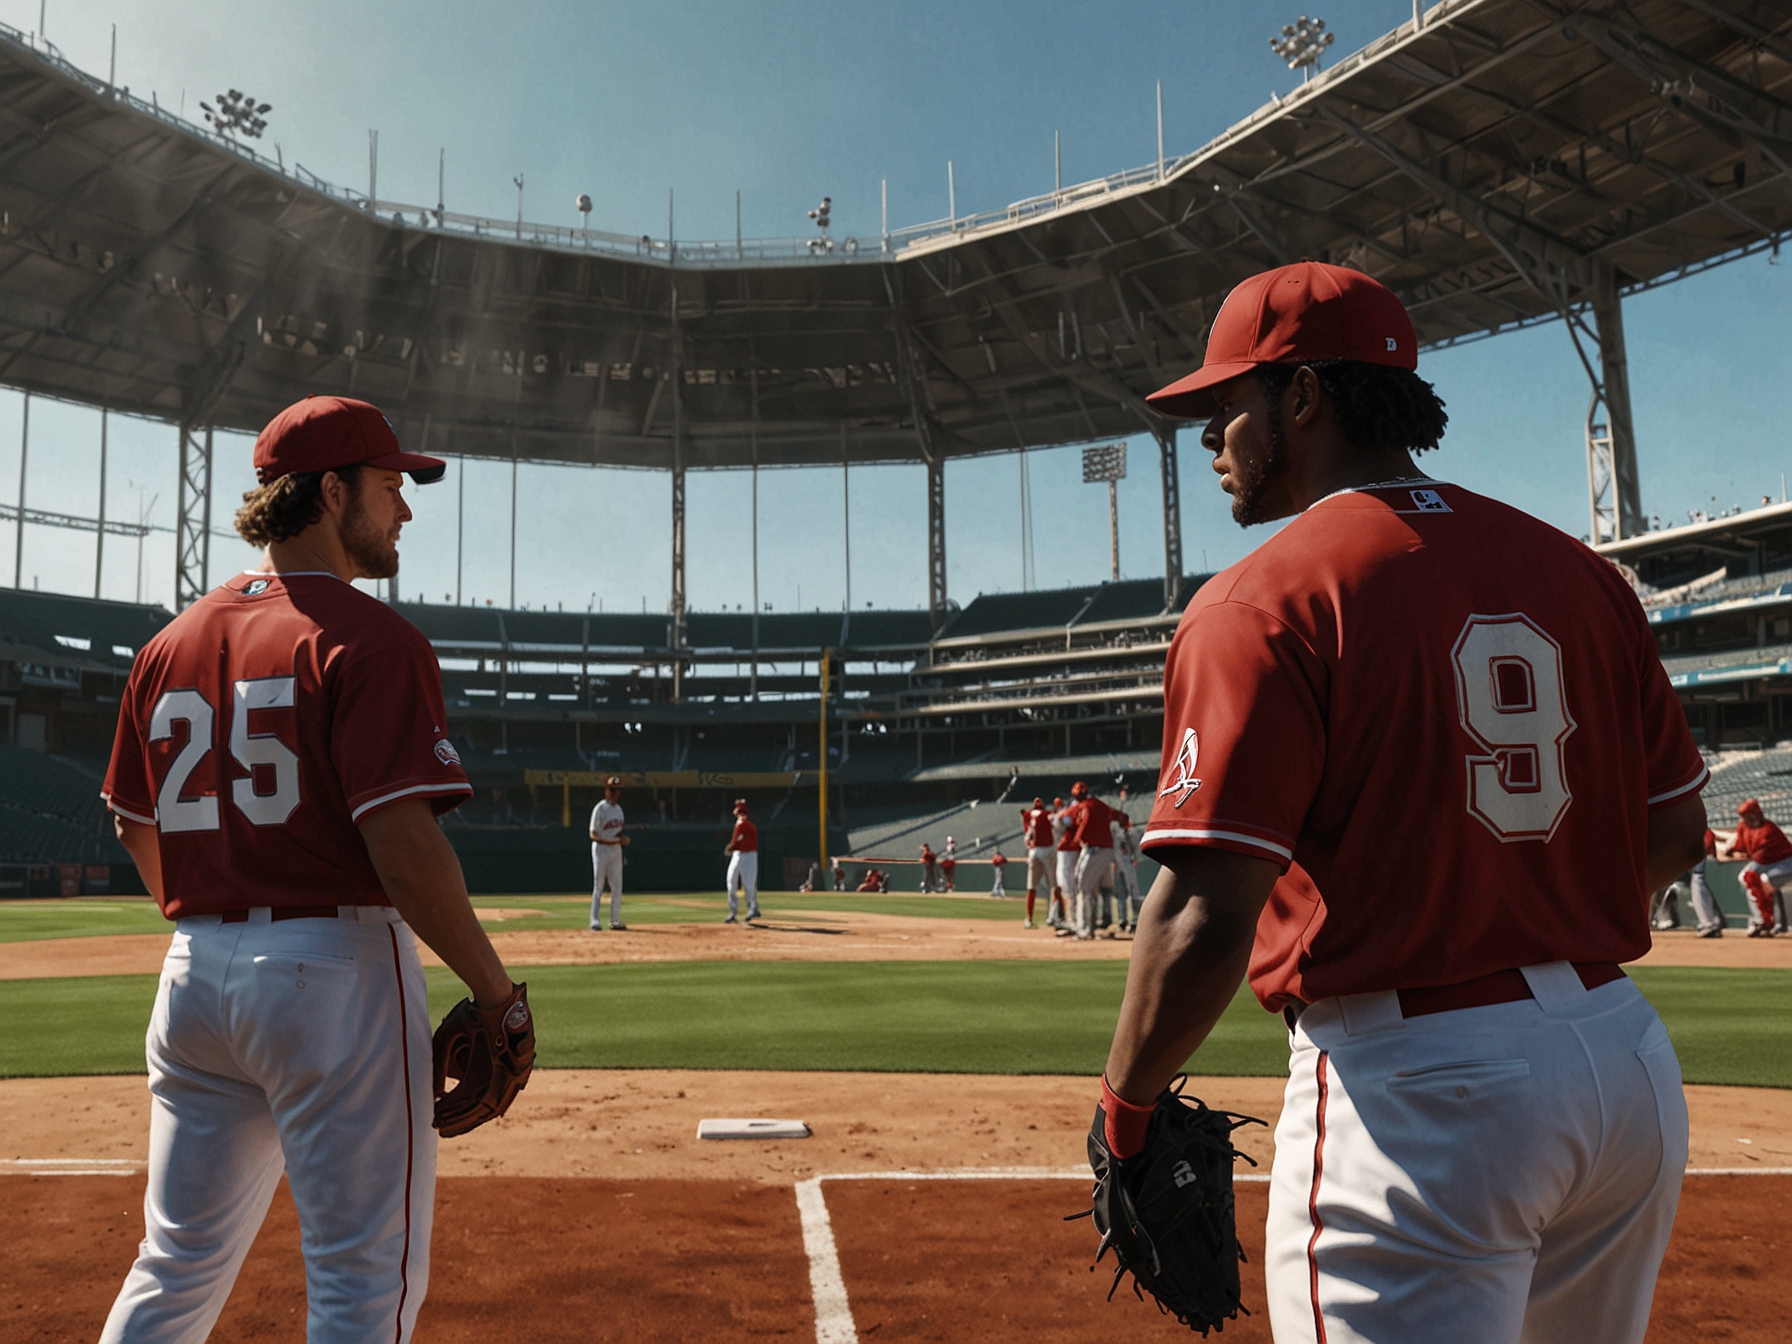 The Arizona Diamondbacks practice on the field, showcasing their confident yet cautious approach. The background highlights the Phillies' home stadium, setting the stage for a highly anticipated rematch series.